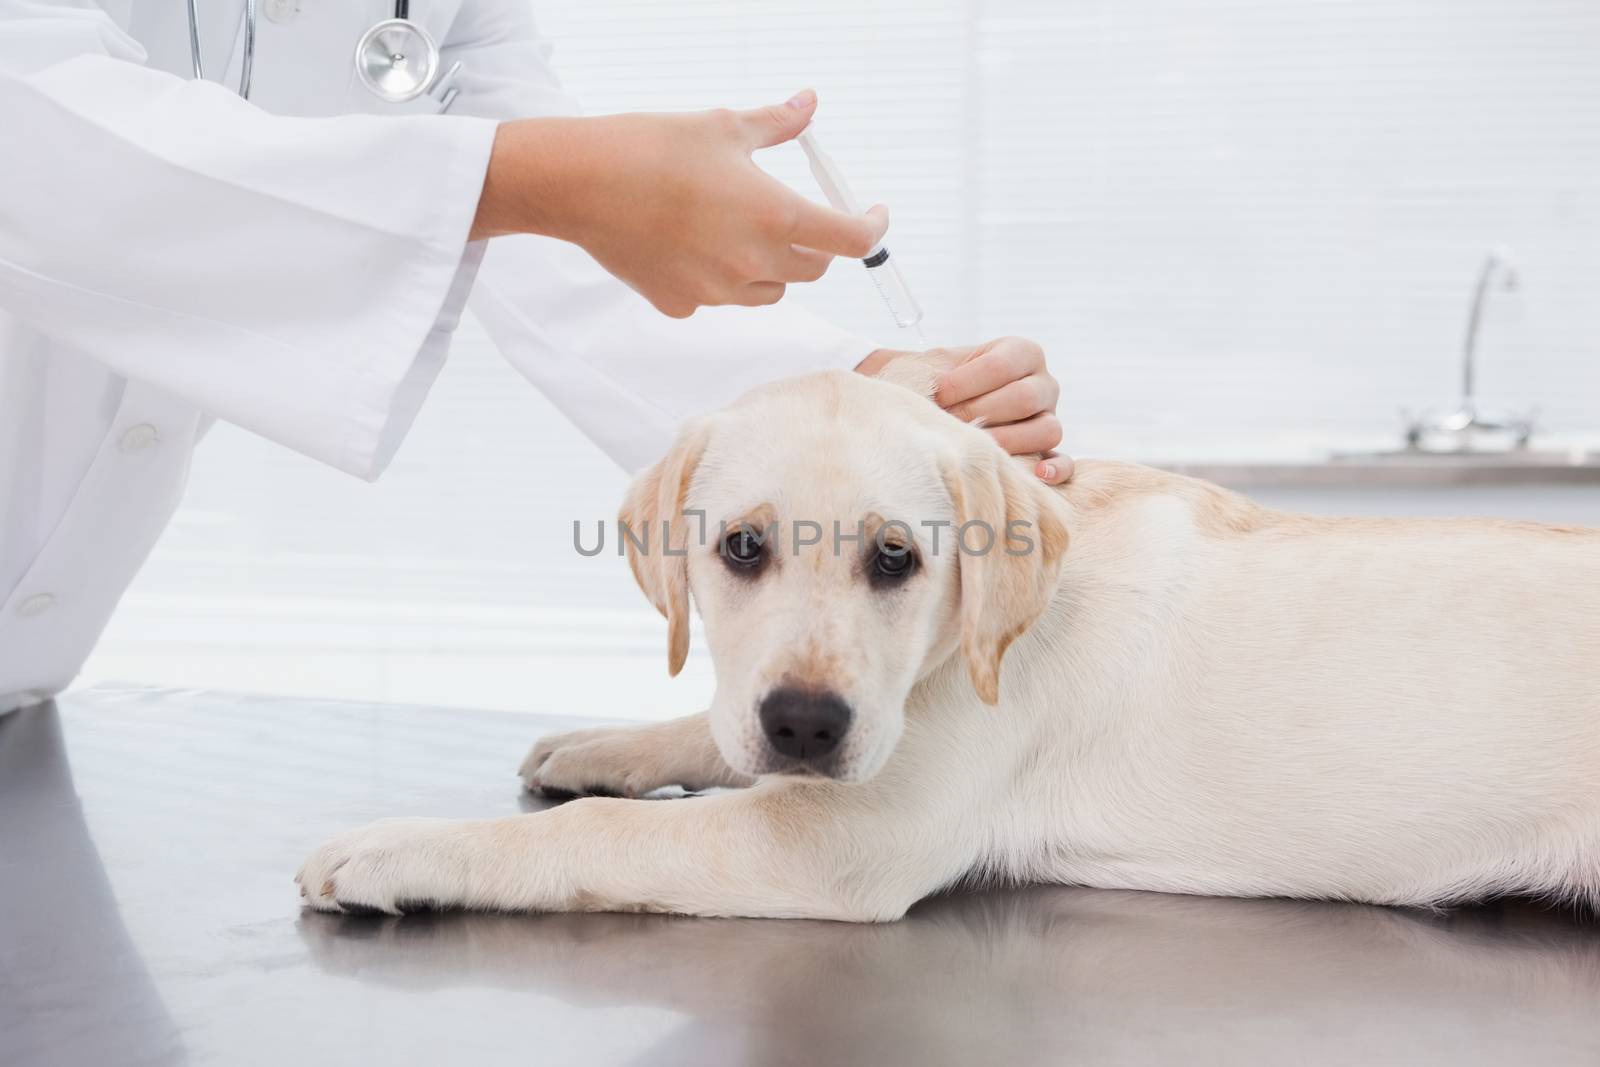 Veterinarian doing injection at a cute dog in medical office